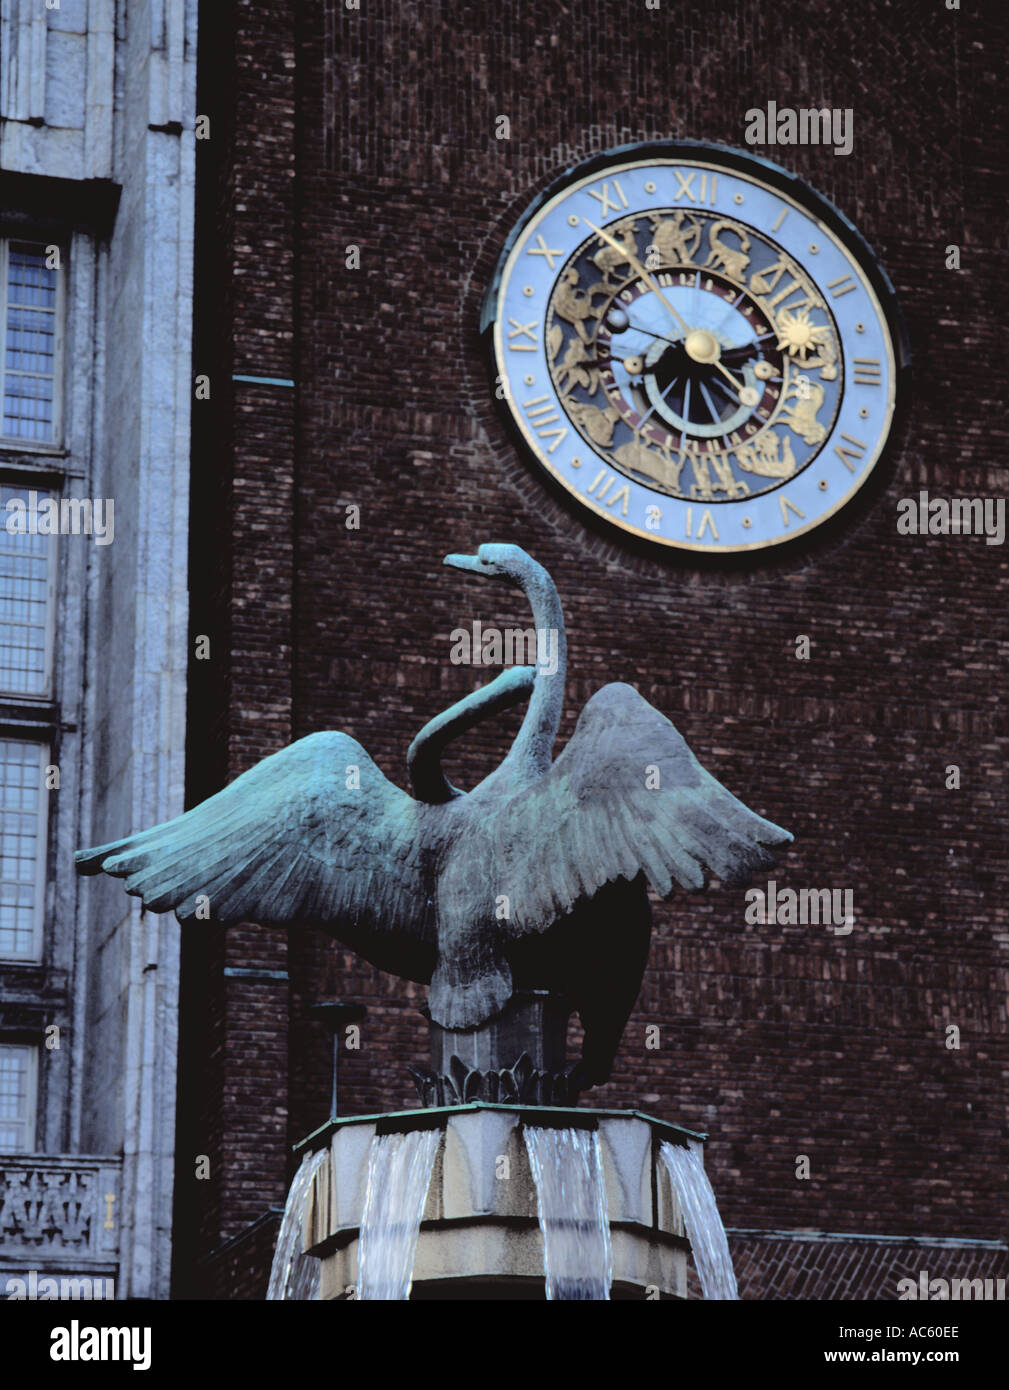 Swan fountain ( by Dyre Vaas ), with astronomical clock beyond, Rådhus ( City Hall ), Oslo, Norway. Stock Photo